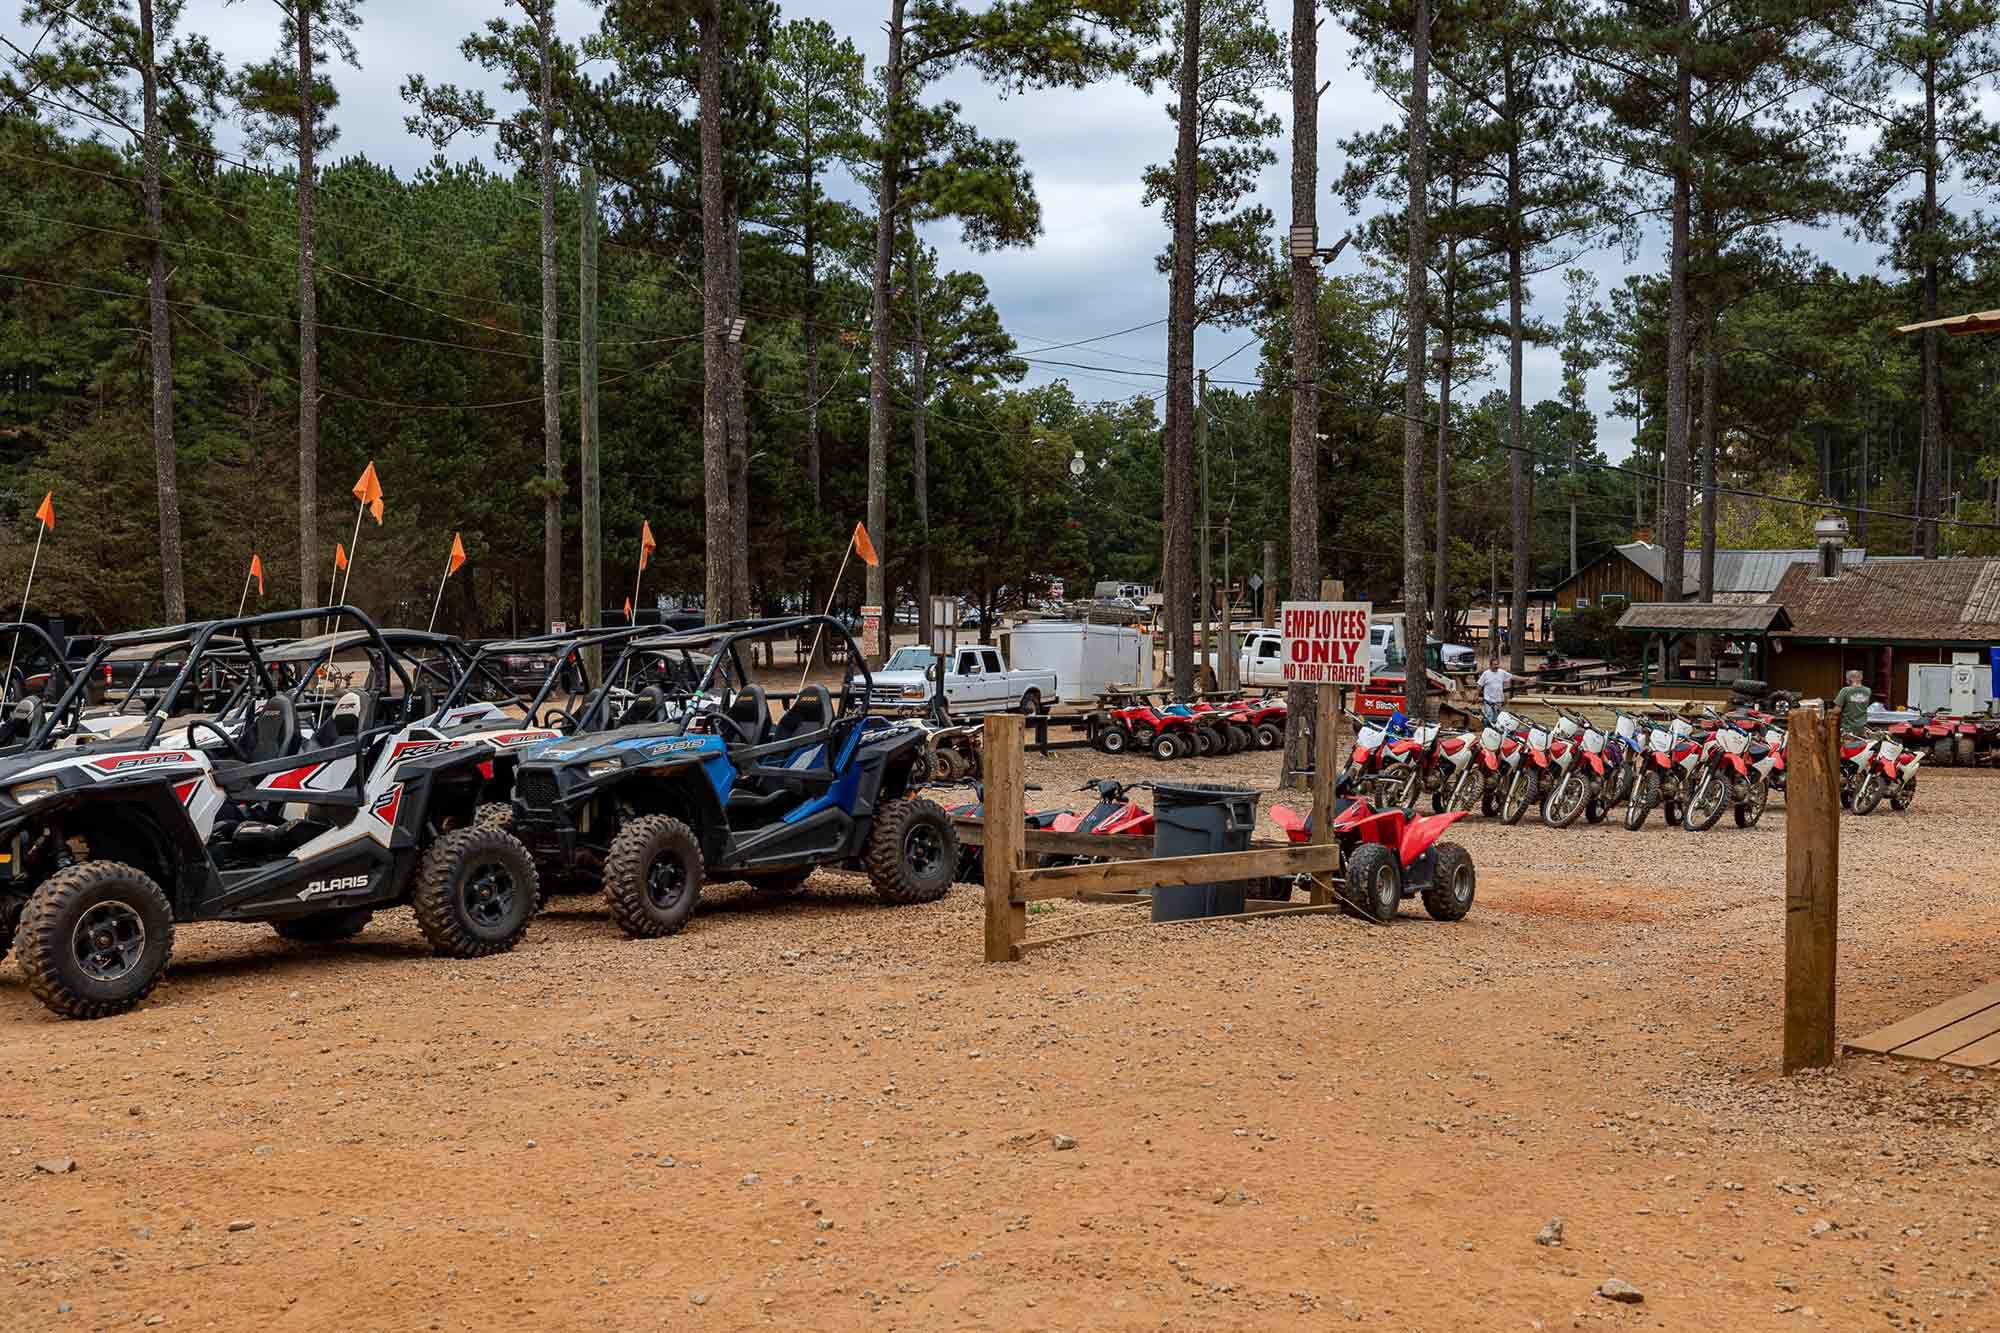 Durhamtown Off Road Resort rents side-by-sides, ATVs, and bikes.